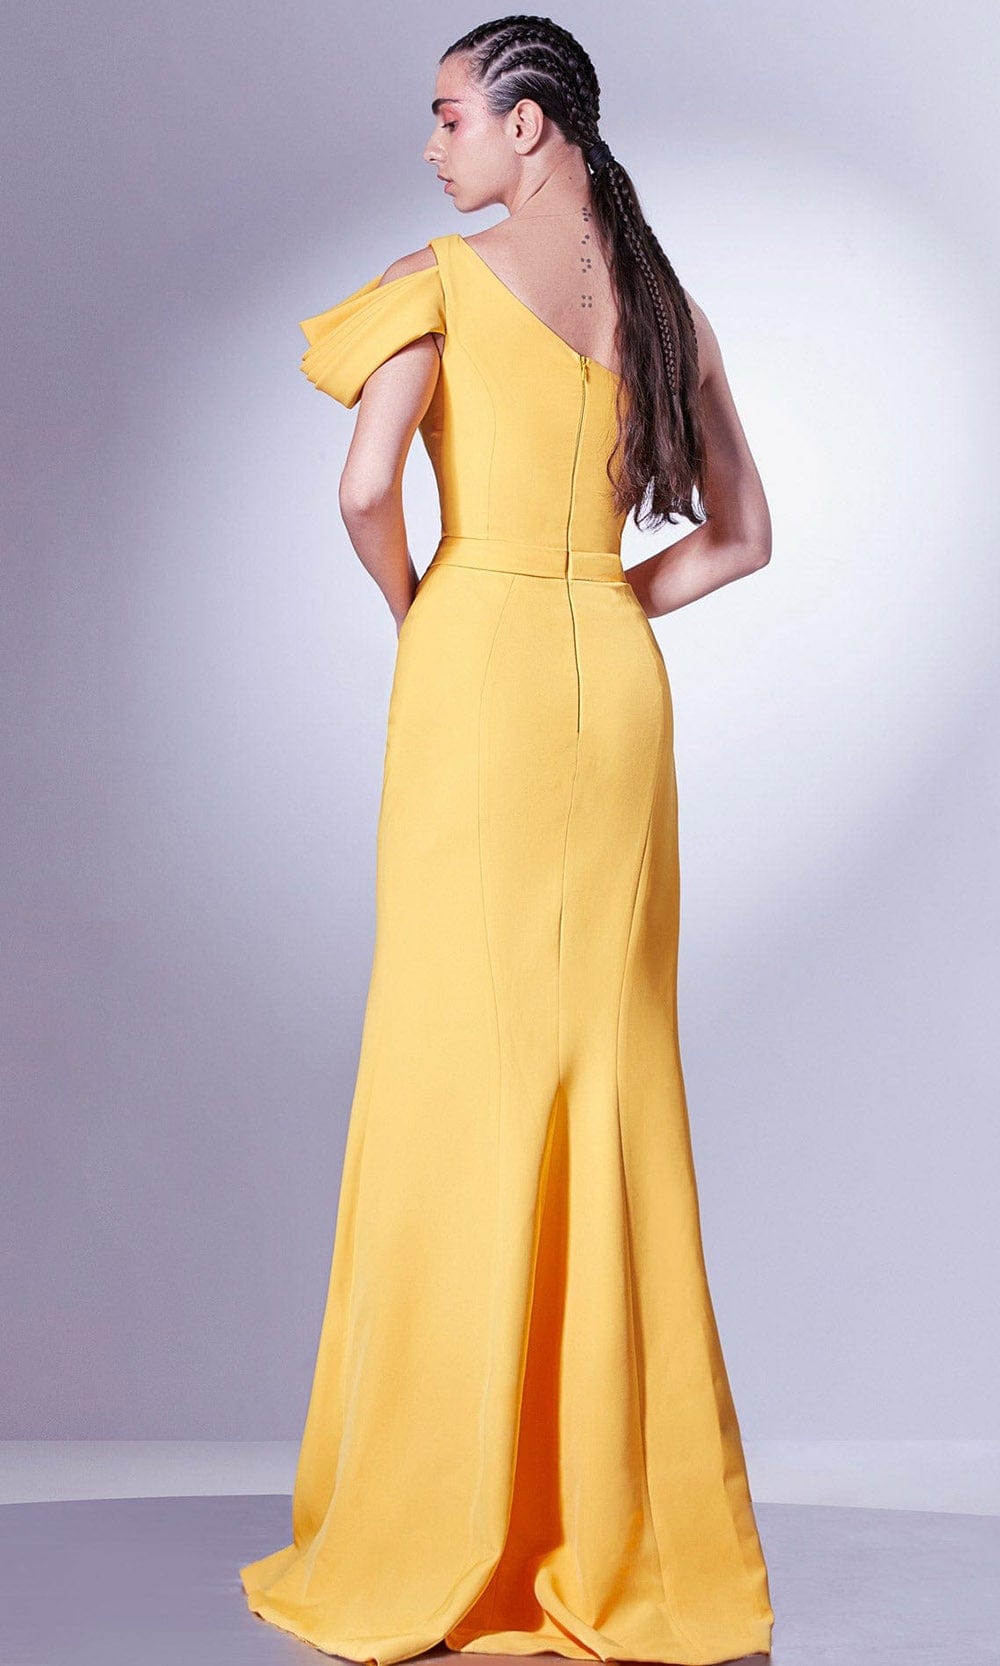 MNM Couture G1342 - Draped Sash Evening Gown Evening Dresses